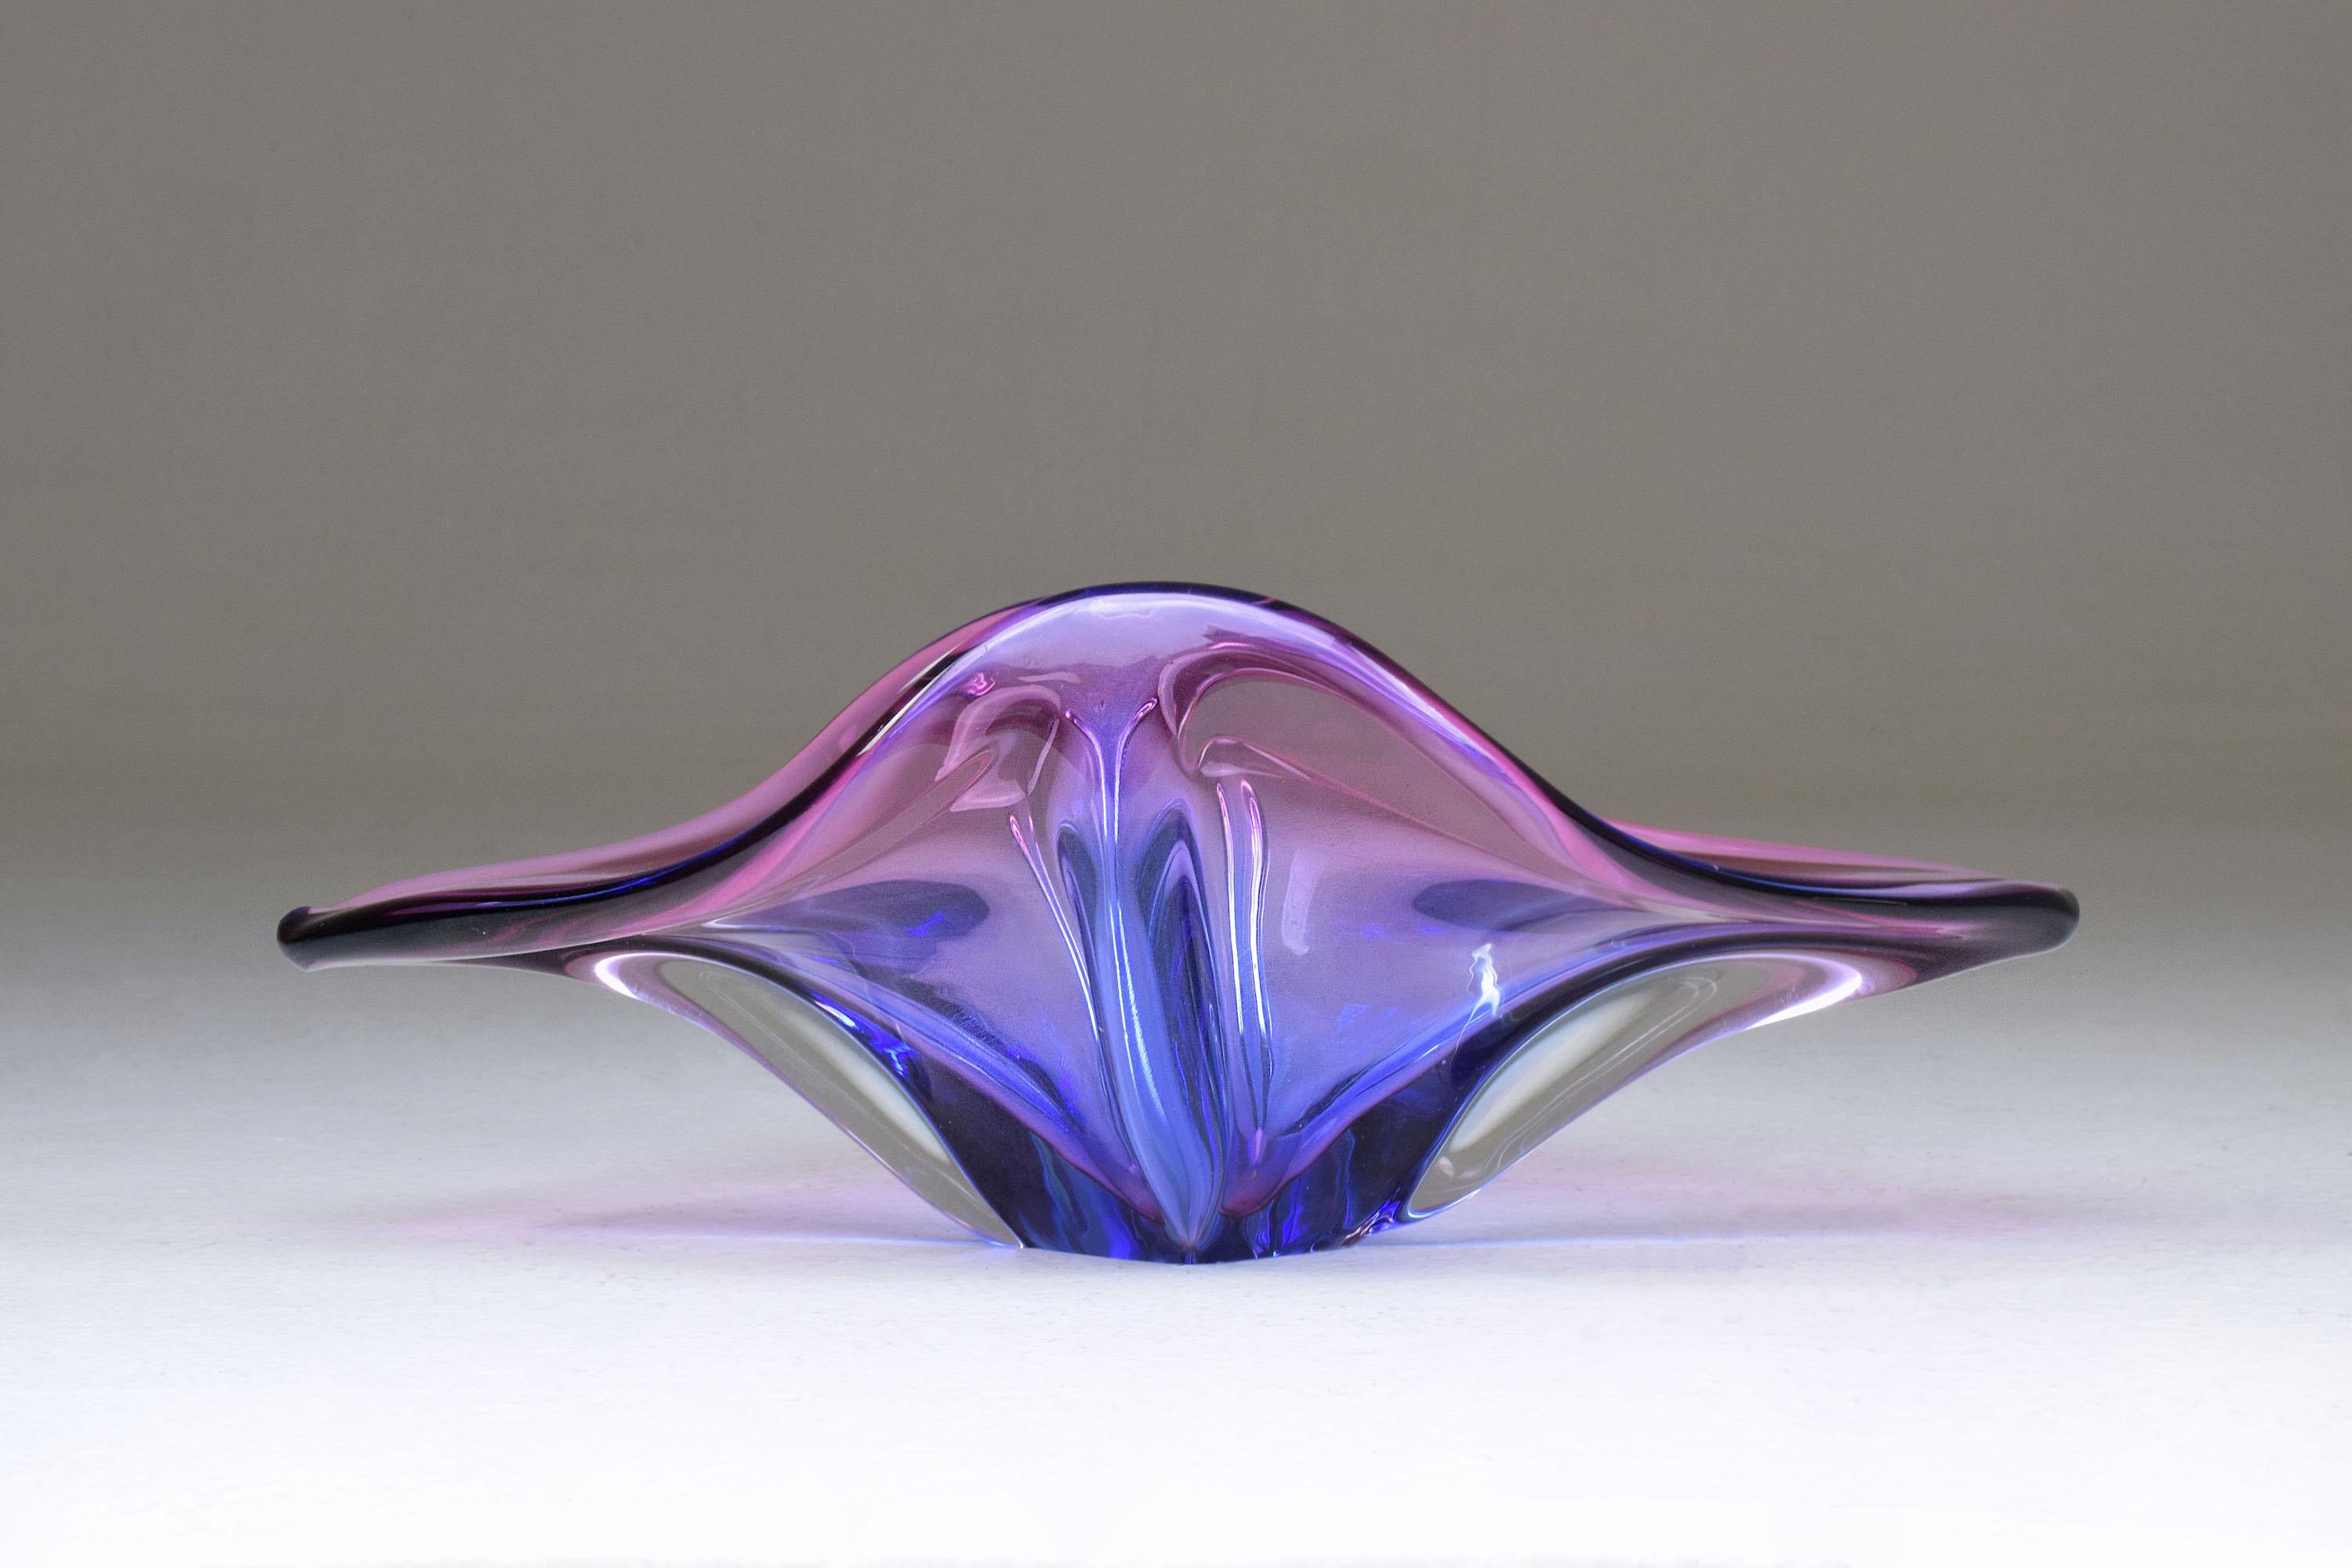 A beautiful Mid-Century Modern centerpiece bowl or art glass vase in the hand blown Sommerso technique of hues of pink and purple,
Italy, circa 1960s.

Spirit Gallery presents a harmonious mix of iconic and engaging 20th century pieces and